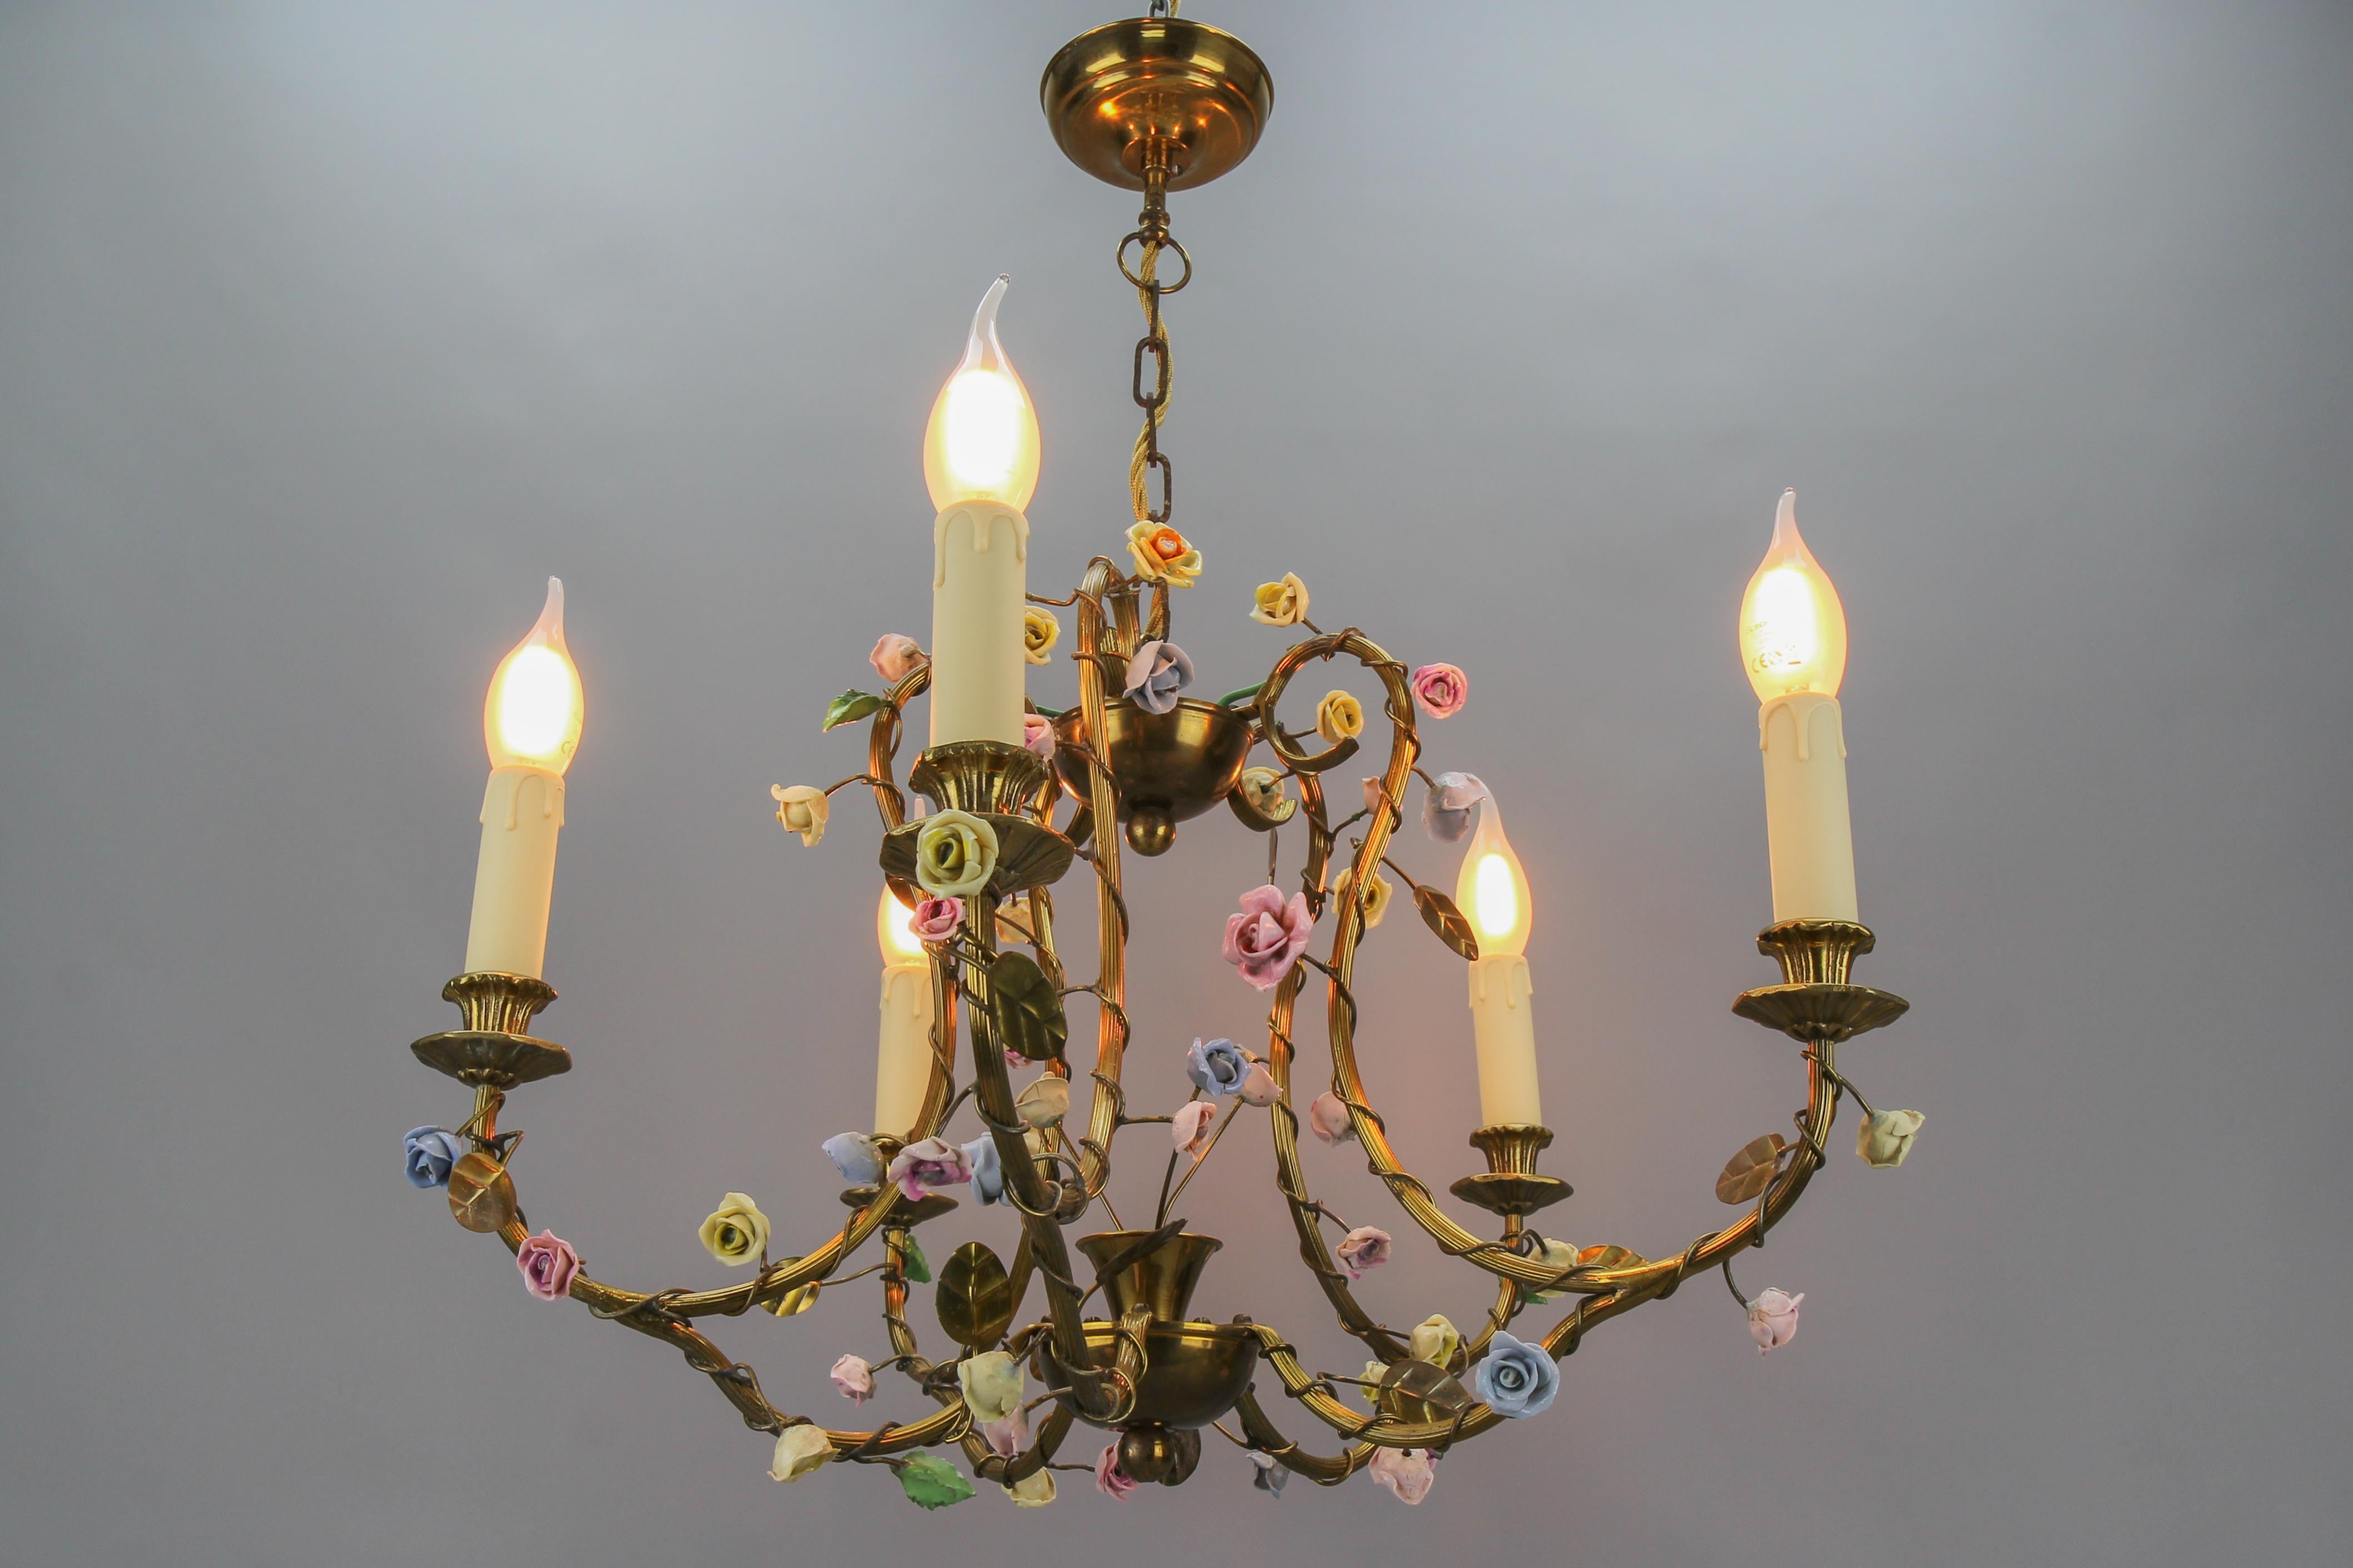 French brass and porcelain flower five-light chandelier, the 1920s.
This adorable chandelier is surrounded by porcelain flowers painted in pastel tones and brass leaves draped around the five branches of the light in a harmonious way. France, circa